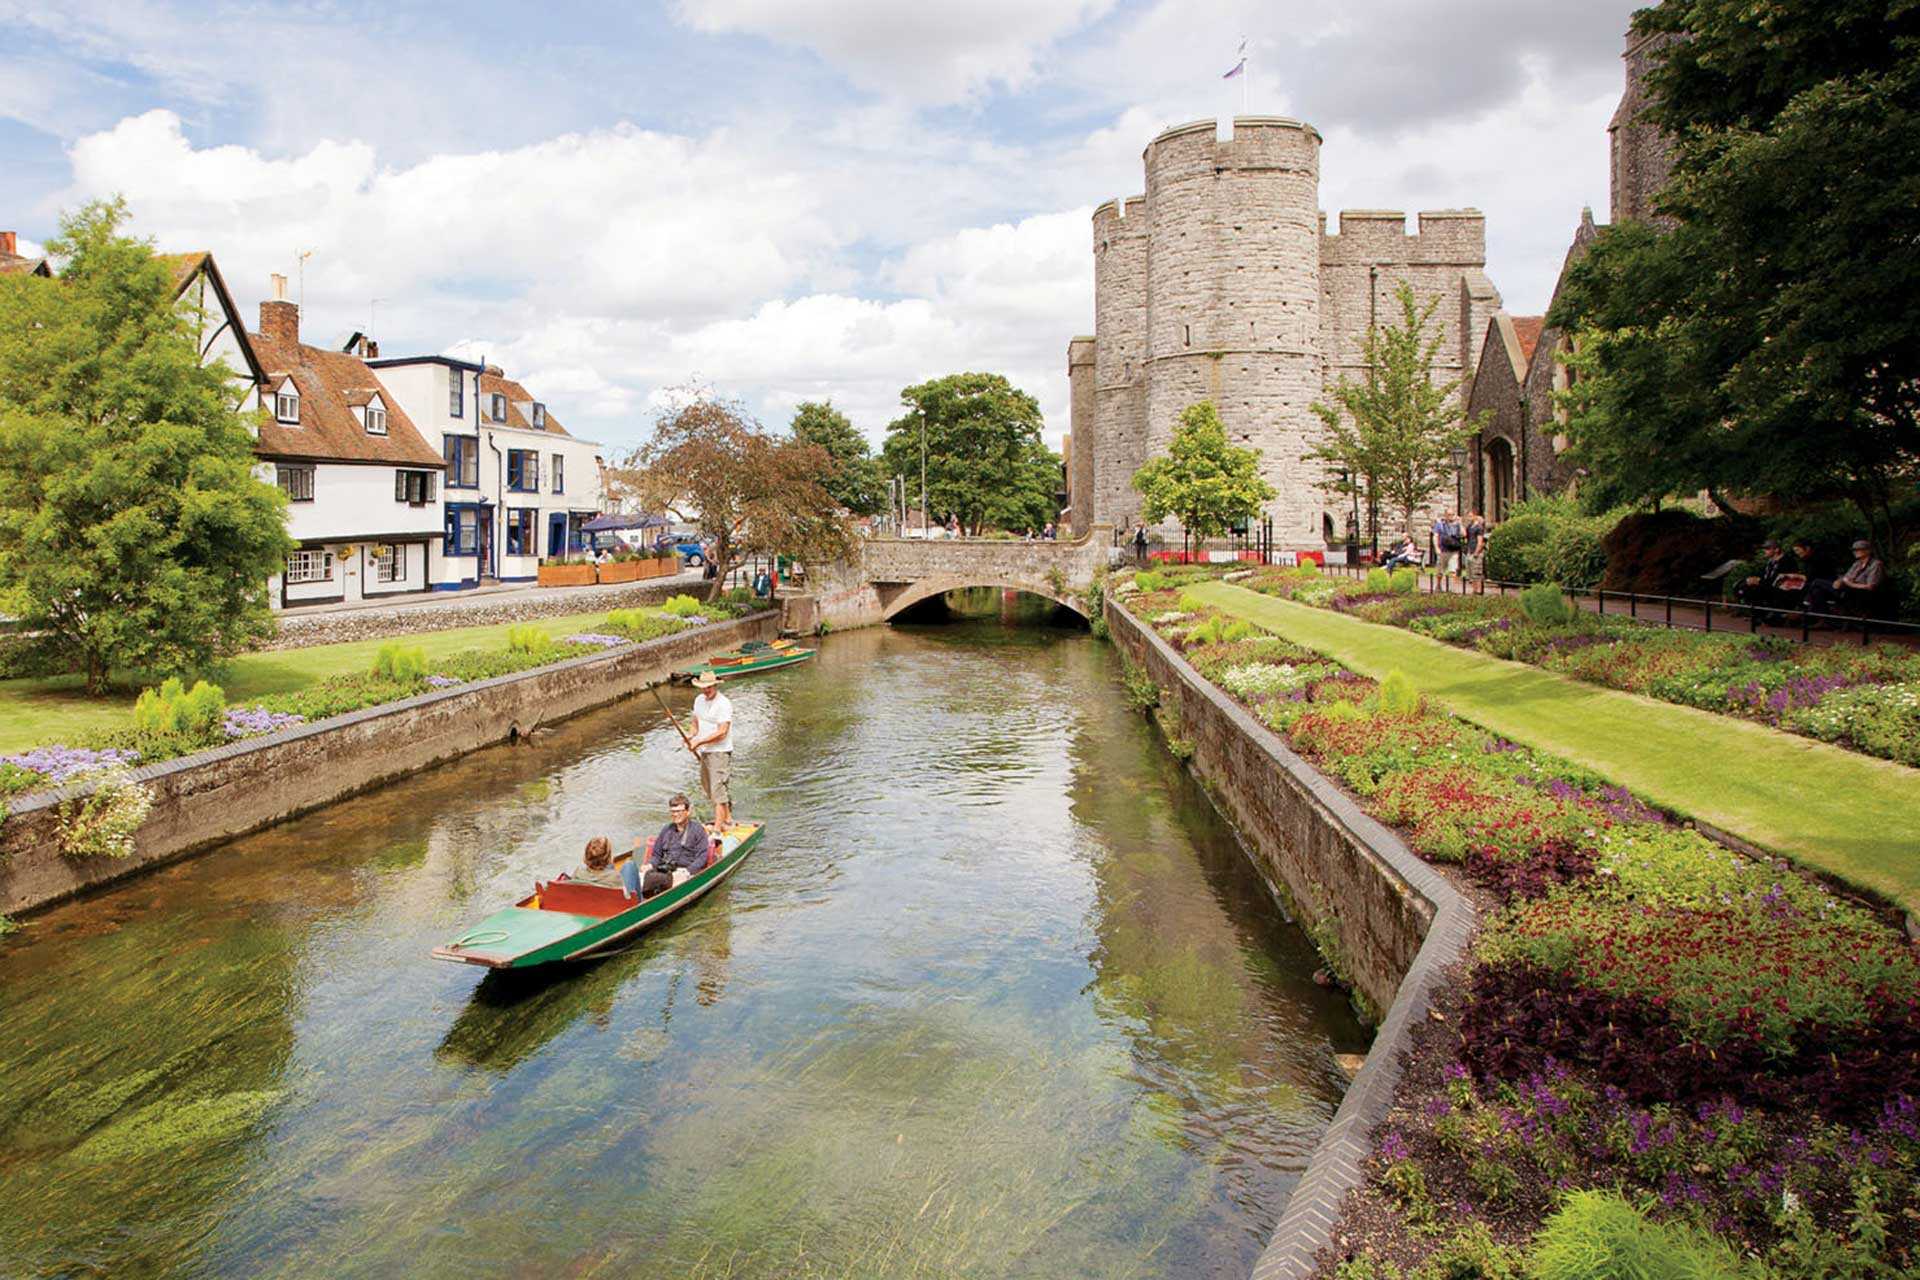 Punting along the River Stour by Westgate Towers